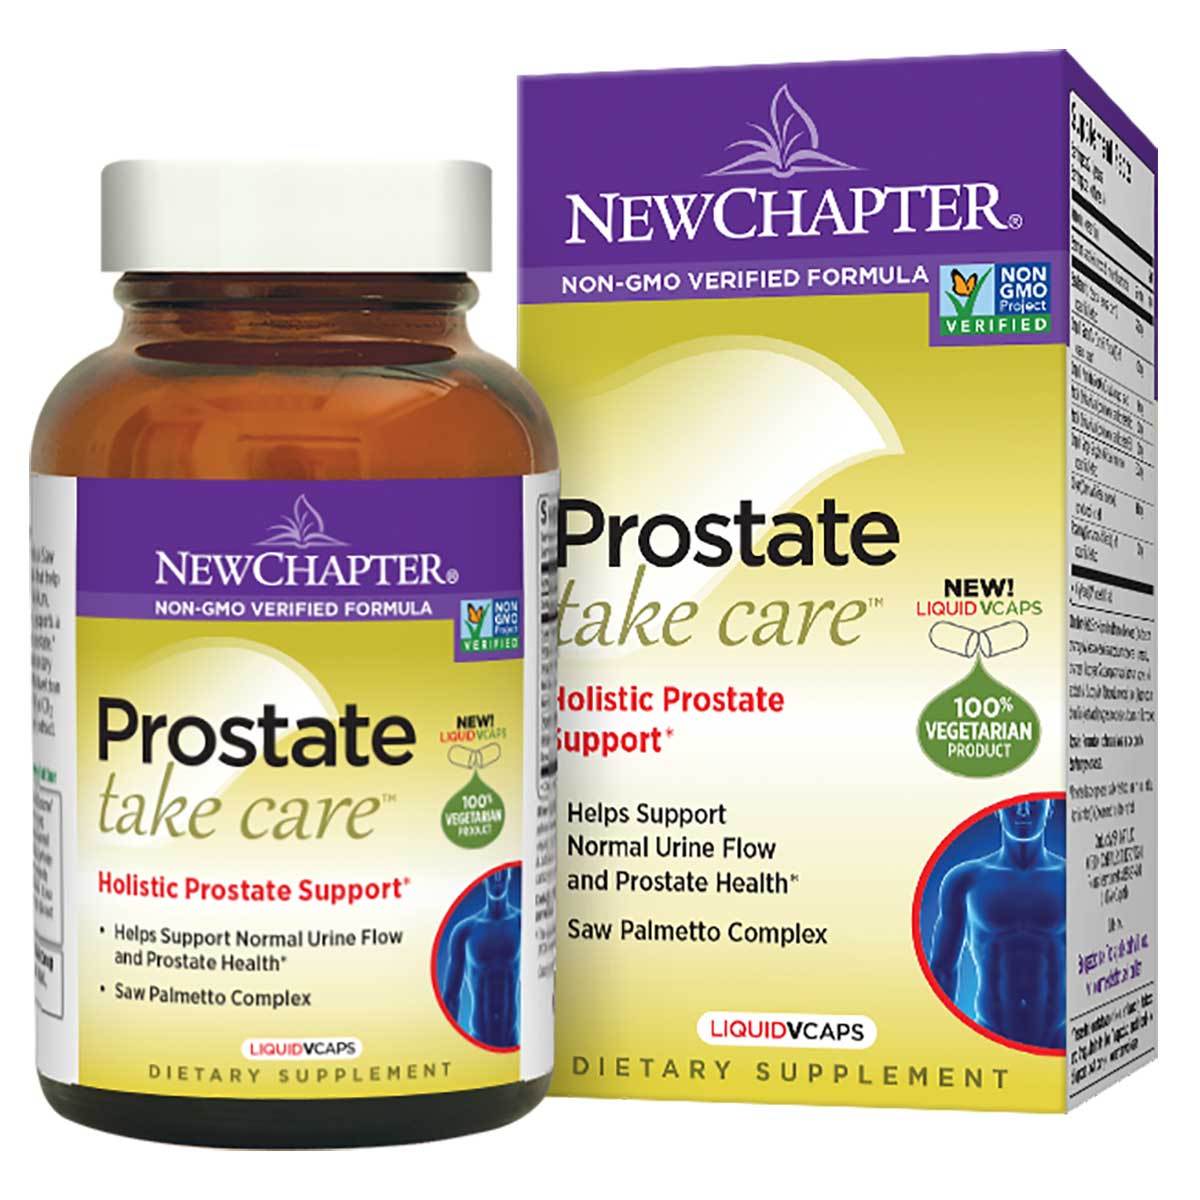 How To Take Care Of The Prostate